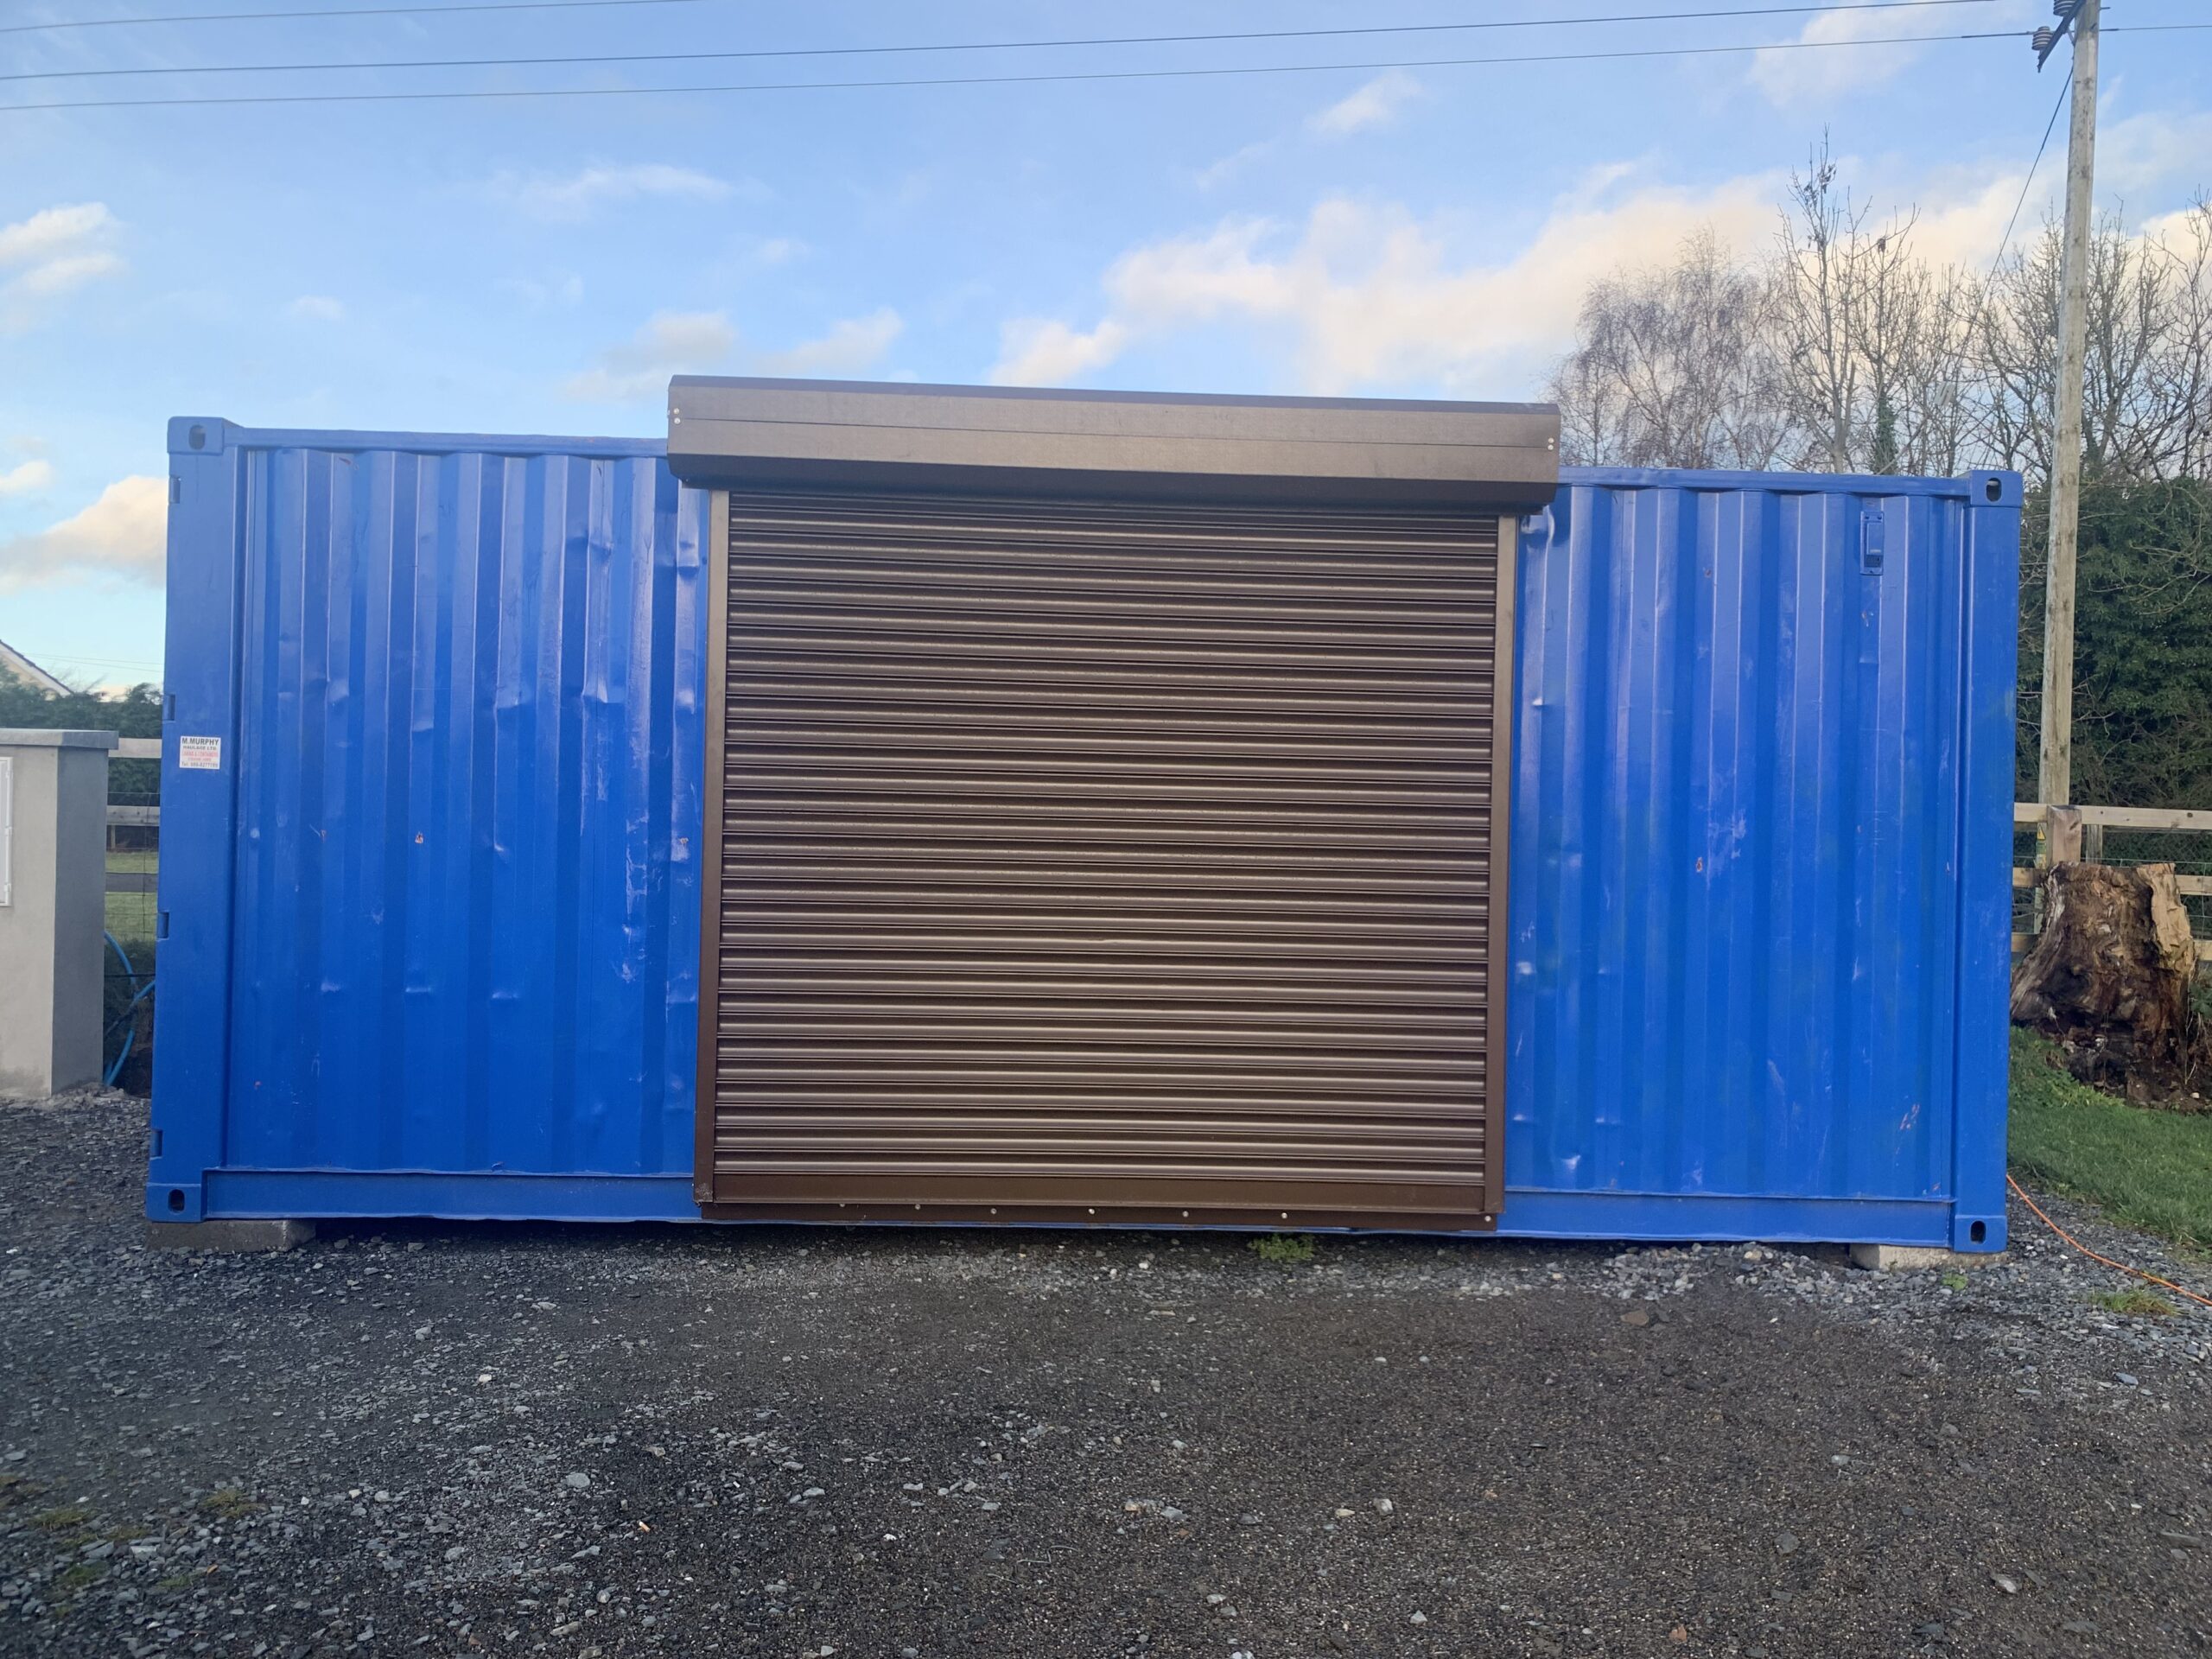 Coffee/Tea Unit fitted with Electric Shutters…thanks to Tom Bealin of Doorfix Ring Gard and Declan and Mick Bealin Junior who worked all morning and afternoon…great work lads…super job.